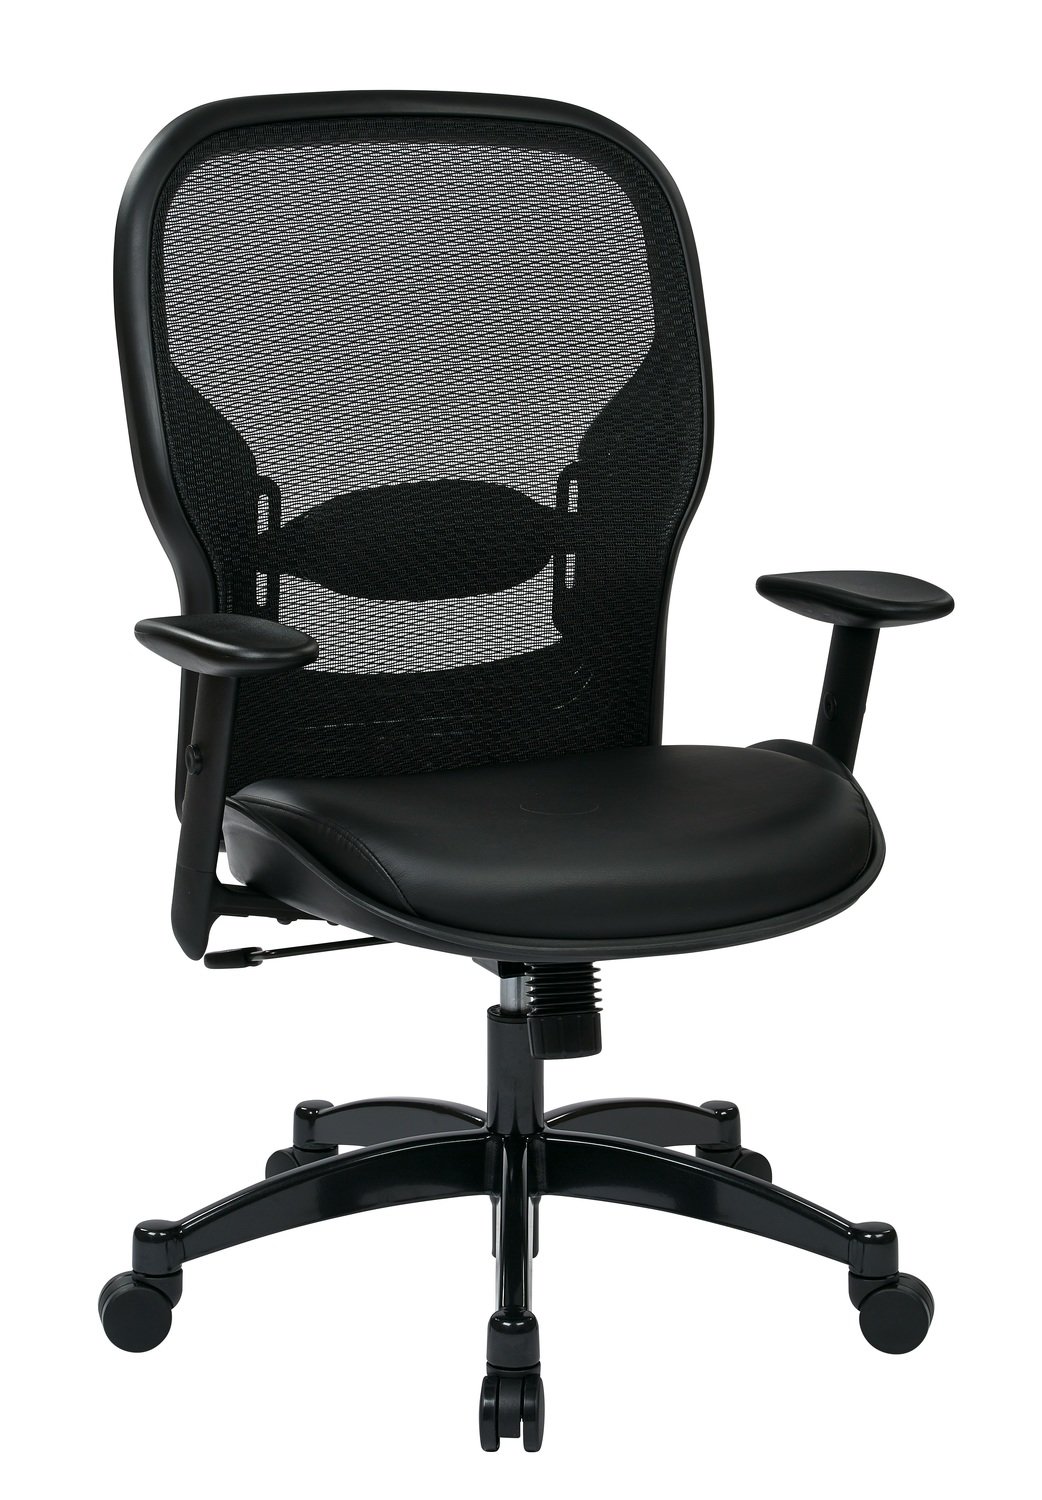 PROFESSIONAL BREATHABLE MESH BACK CHAIR